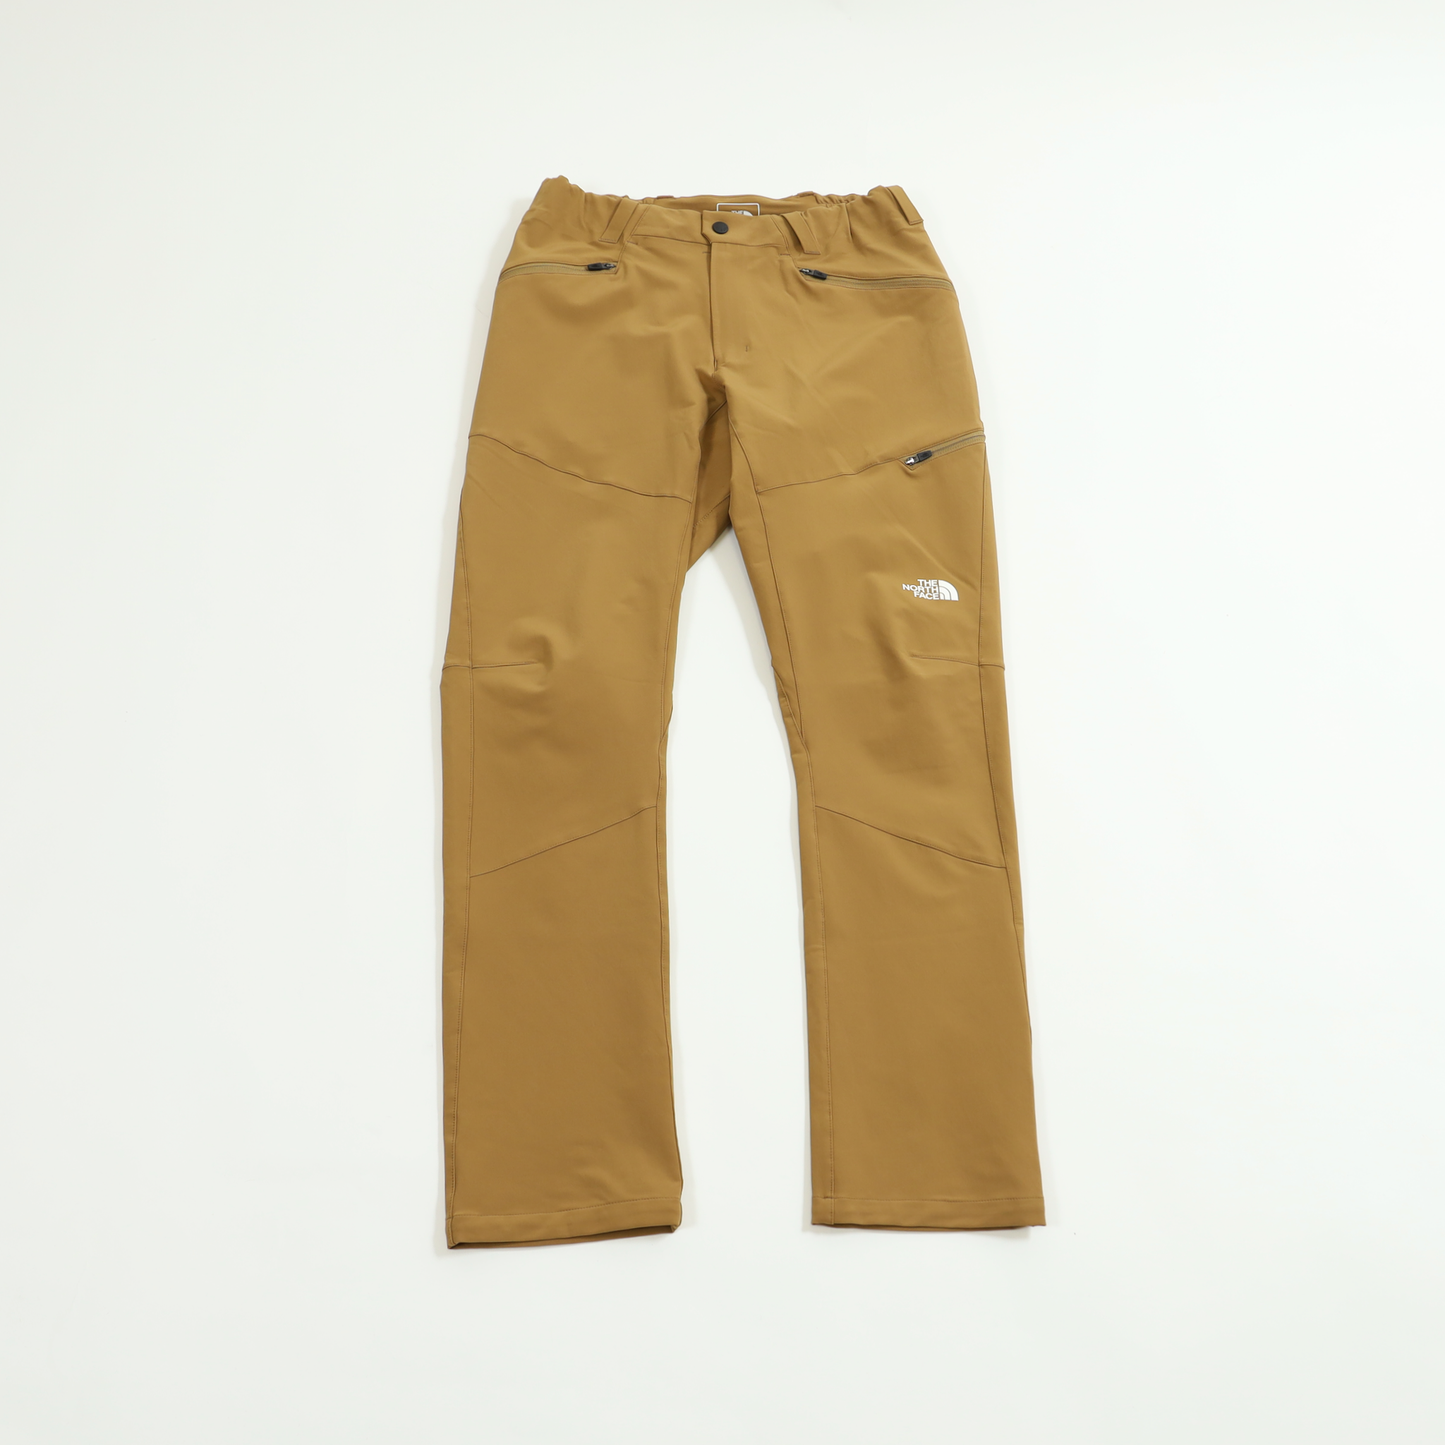 【THE NORTH FACE】Hammer Head Pant